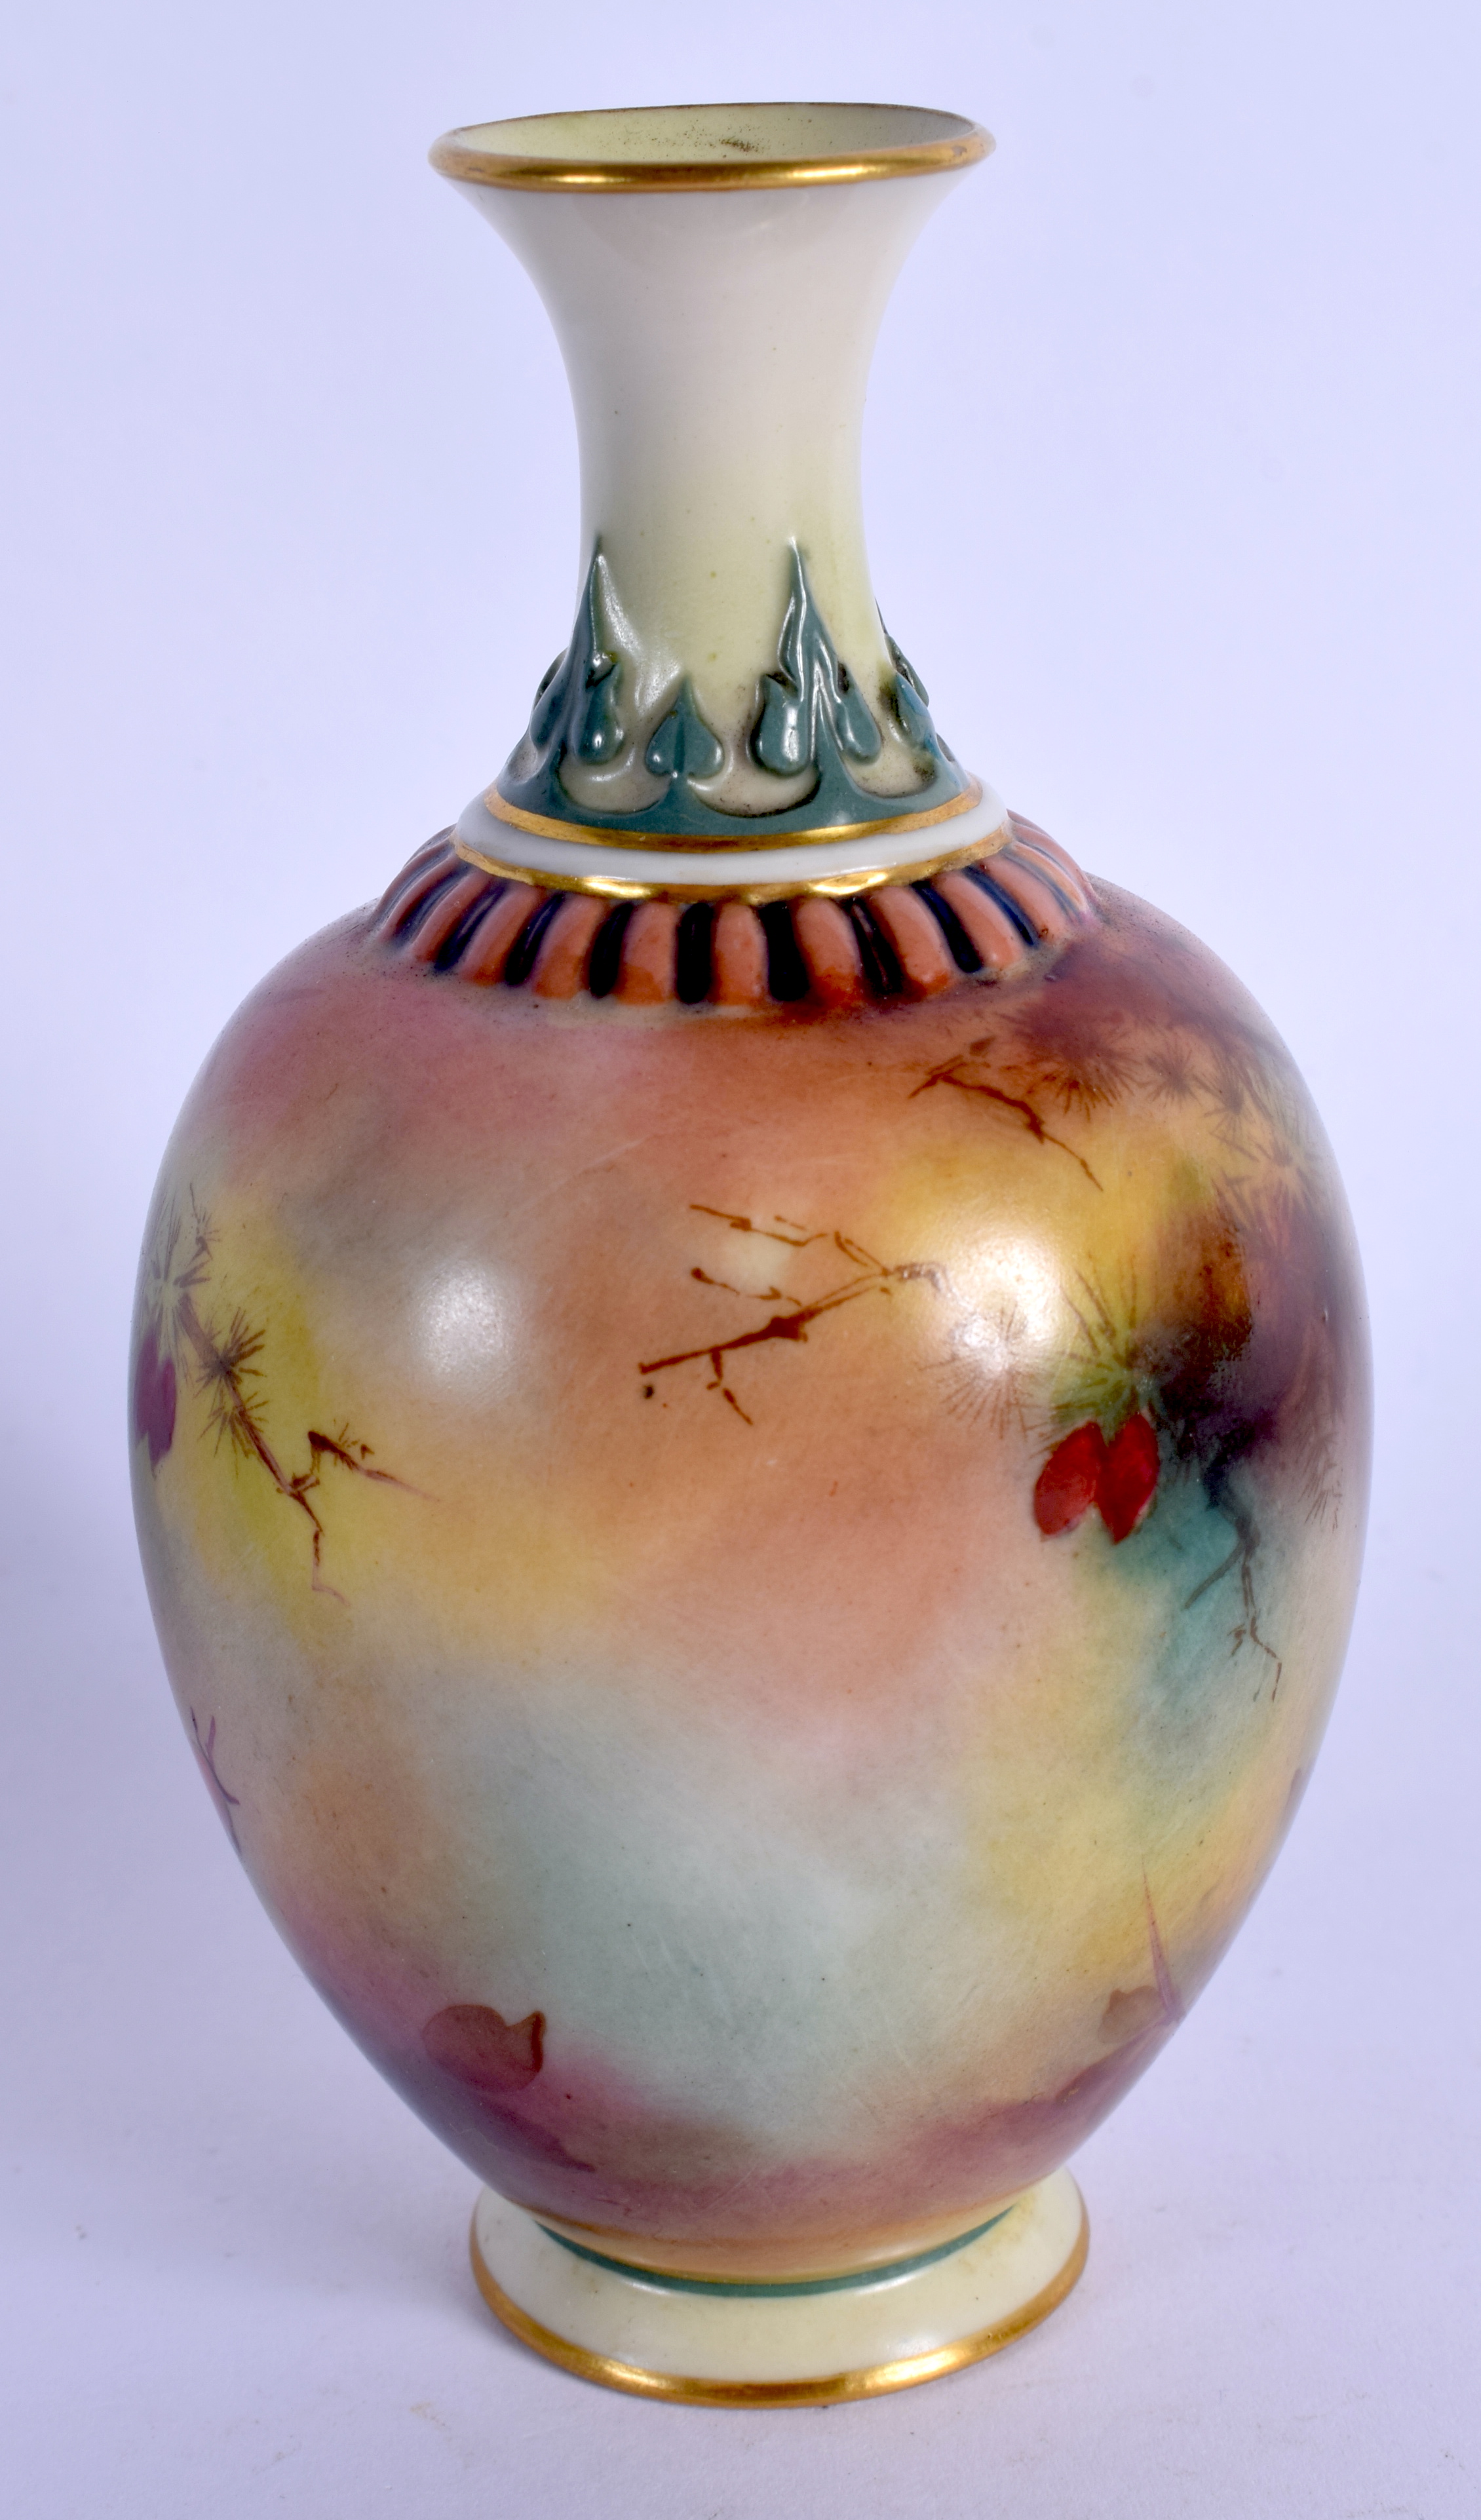 Royal Worcester amphora shaped vase painted with a Peacock date code 1908, shape 286 H. 11.5cm high - Image 2 of 3